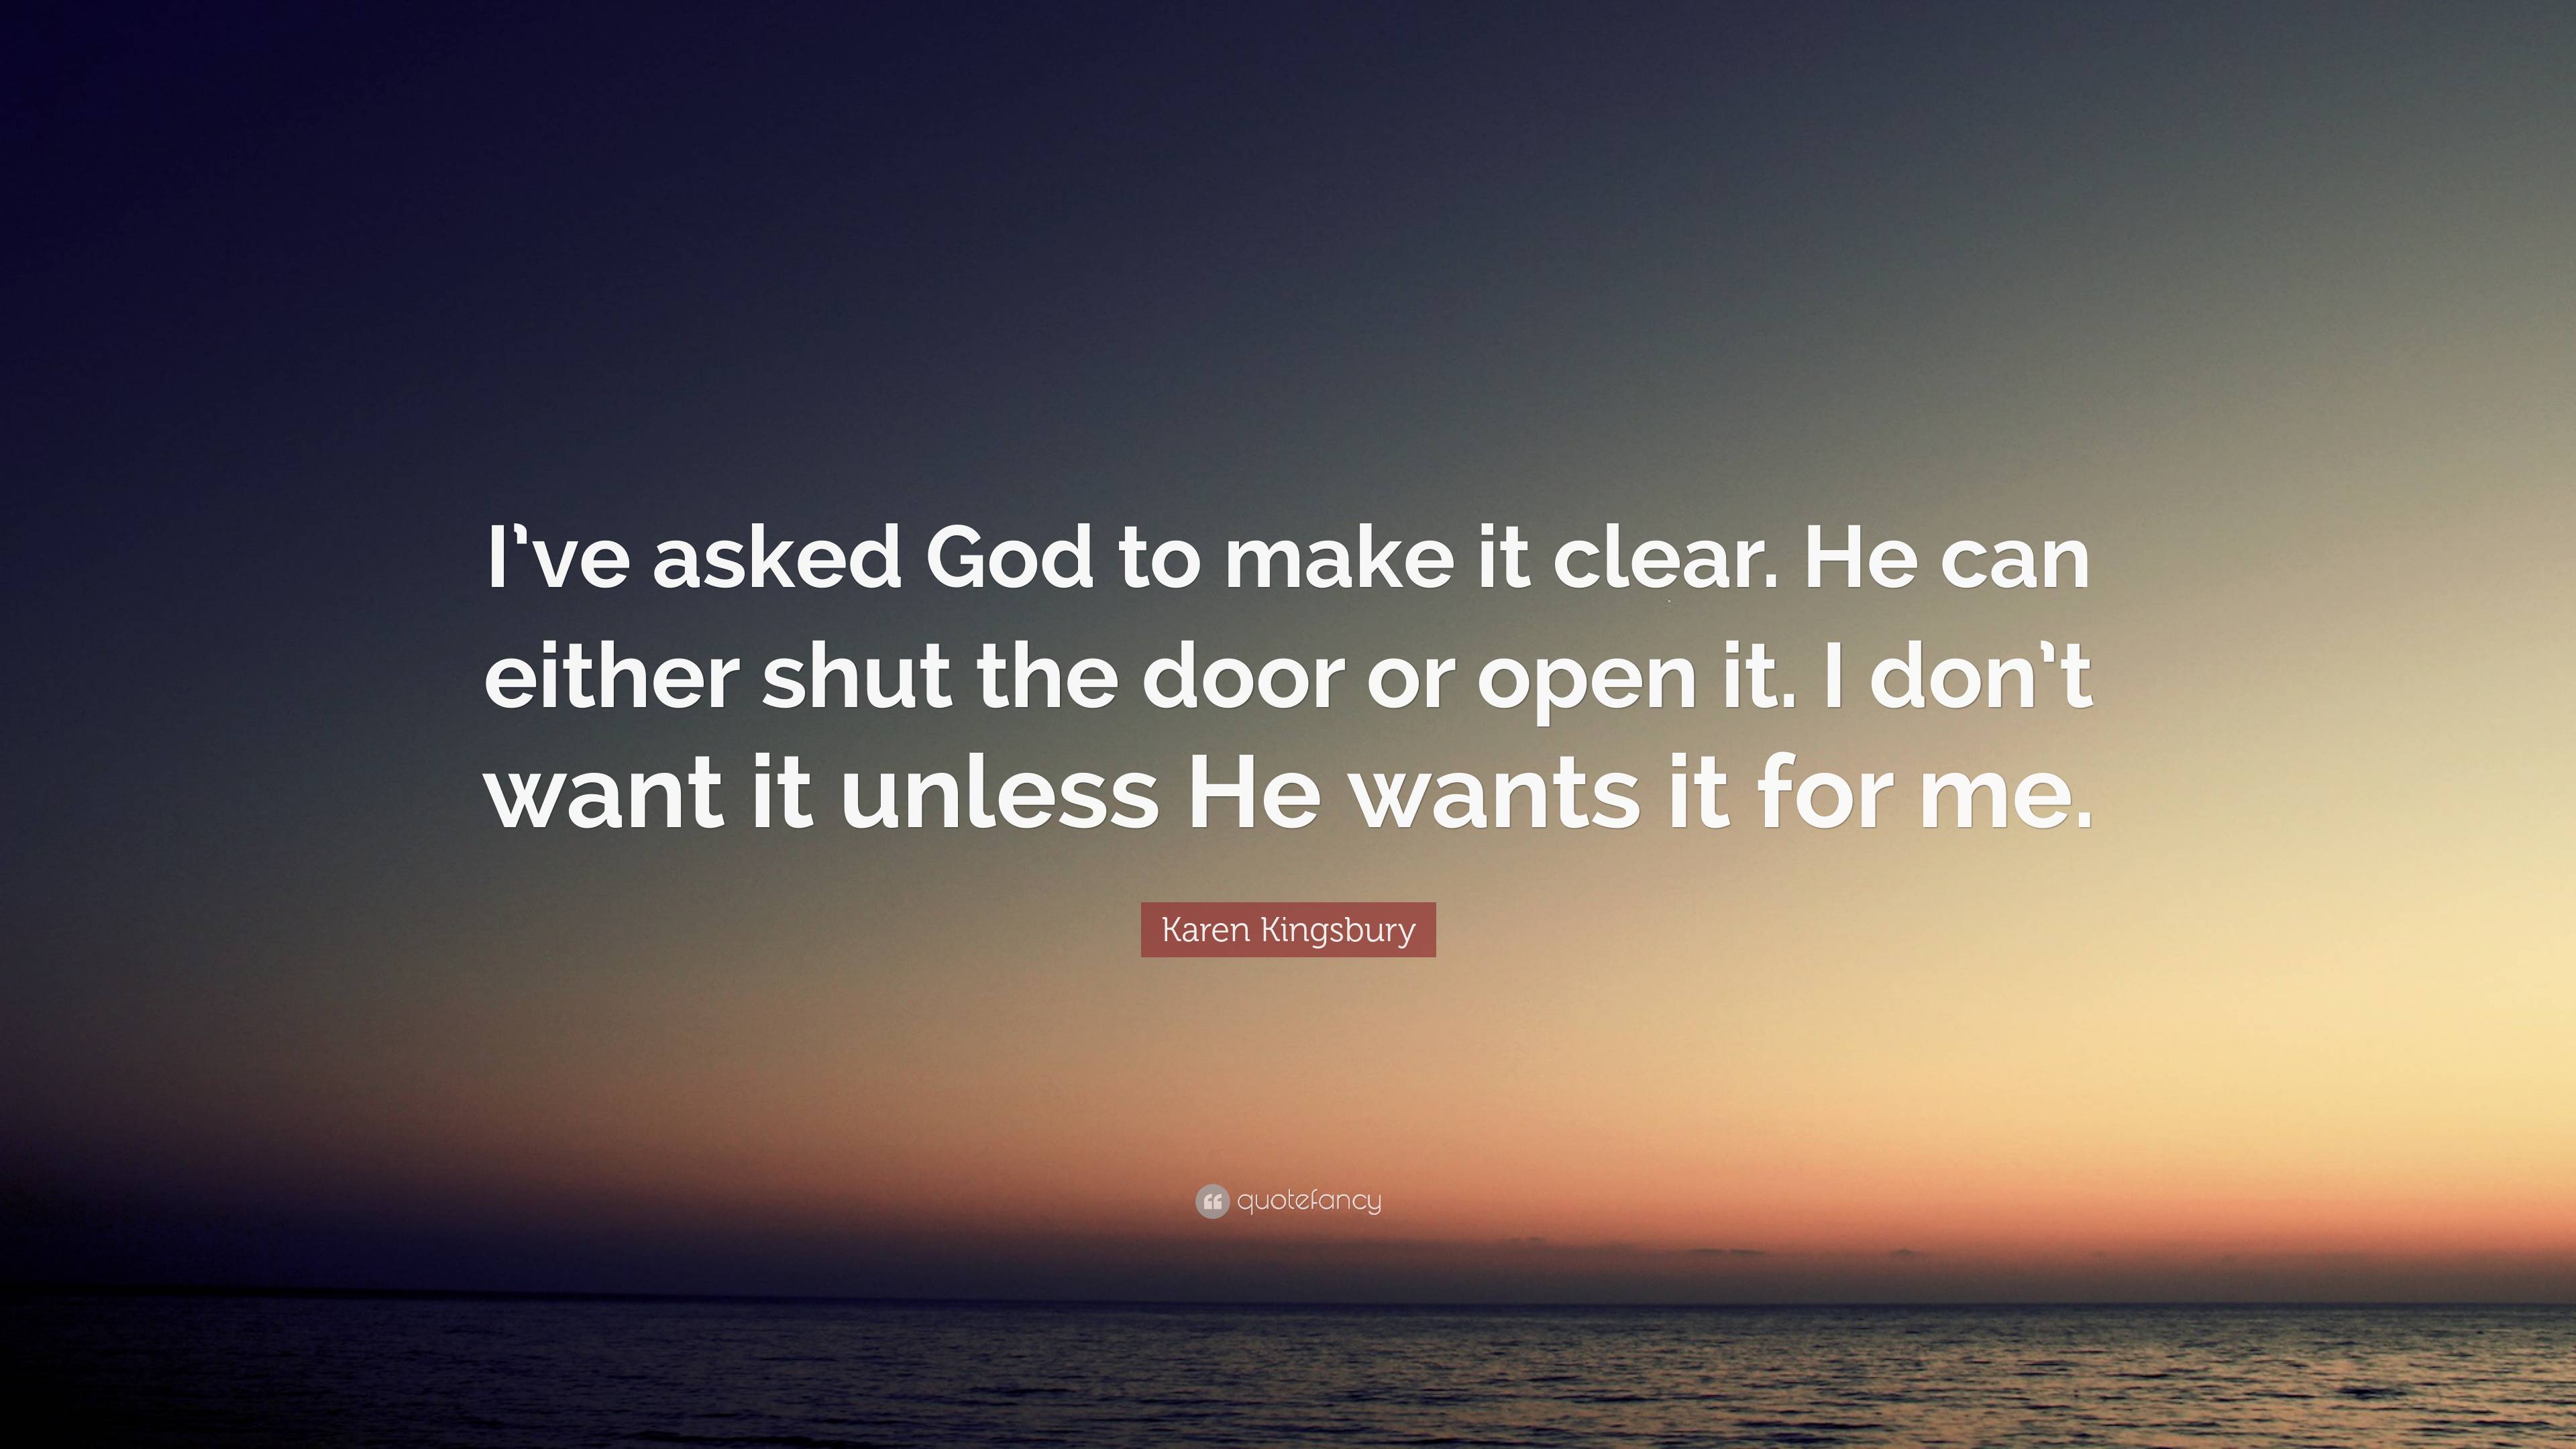 Karen Kingsbury Quote: “I’ve asked God to make it clear. He can either ...